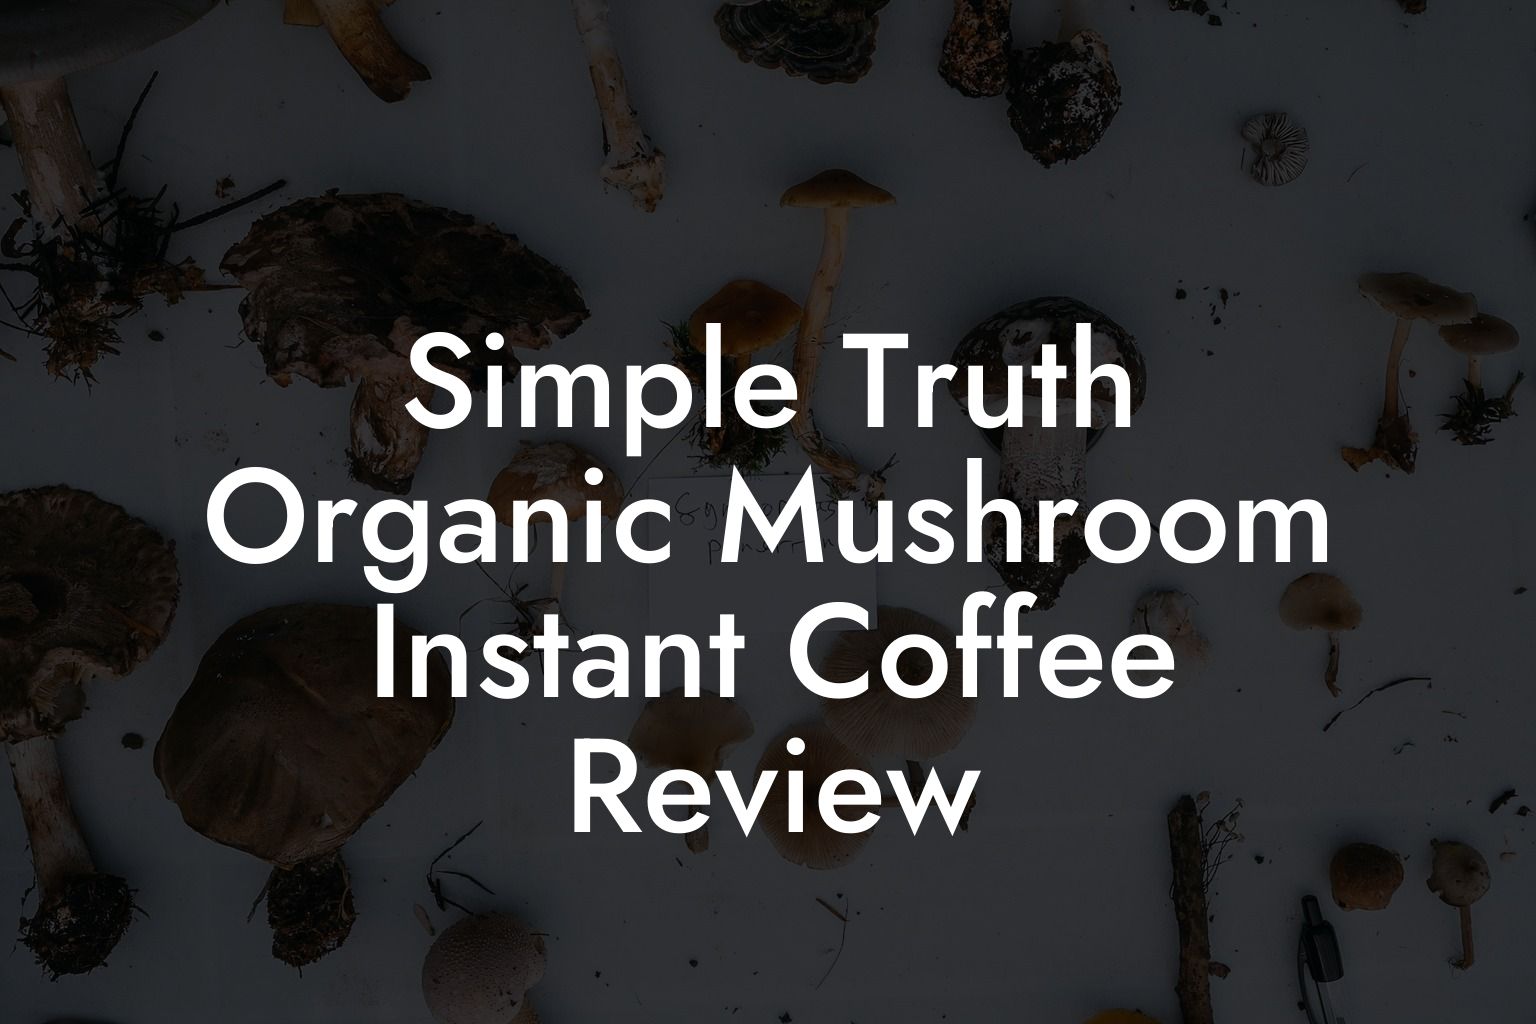 Simple Truth Organic Mushroom Instant Coffee Review